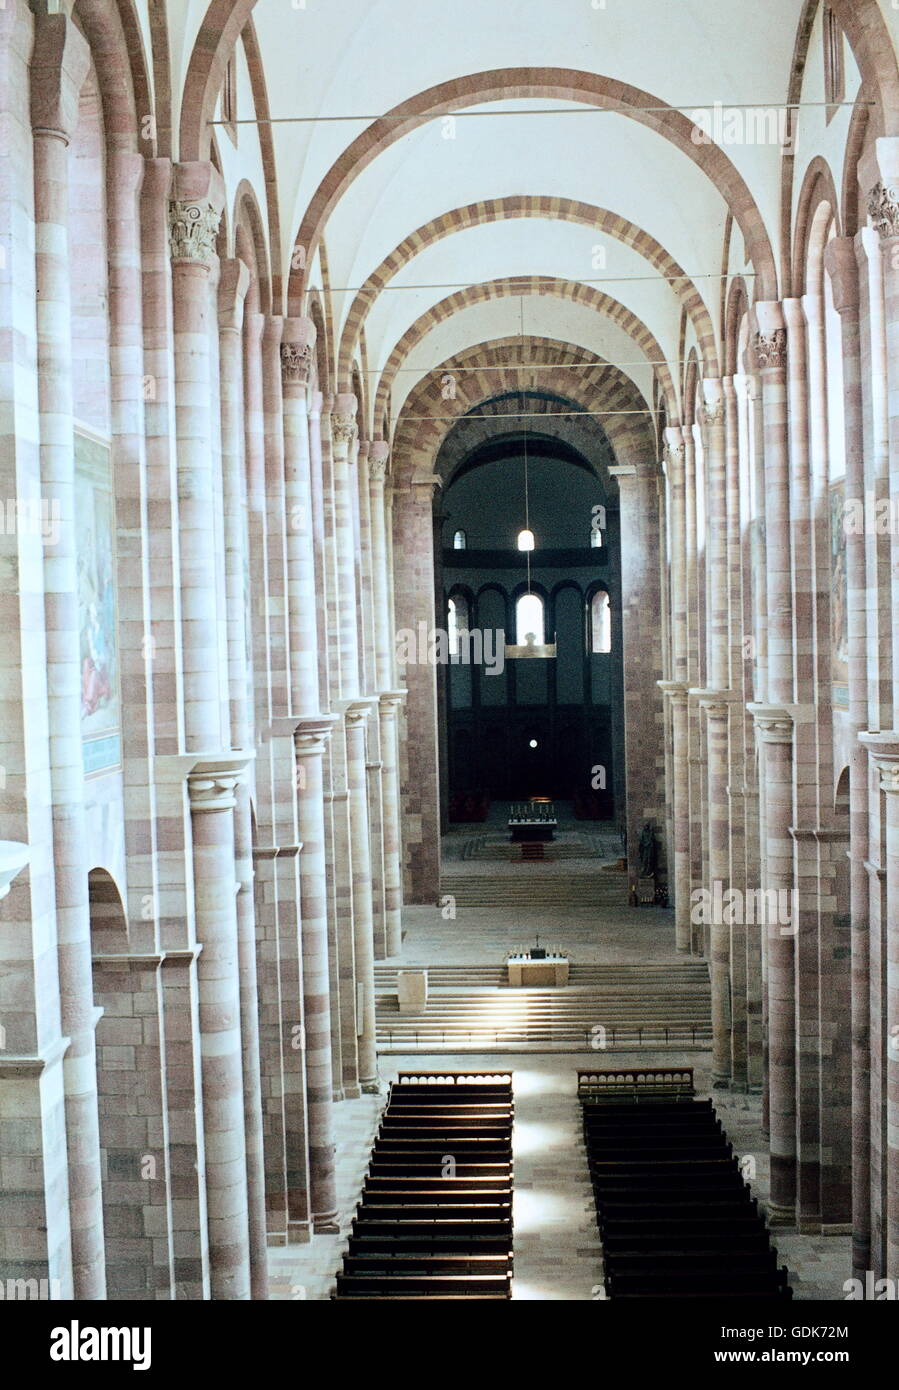 geography / travel, Germany, Rhineland-Palatinate, Speyer, churches, cathedral, built: 1030 - 1061, nave, detail, interior view, Stock Photo